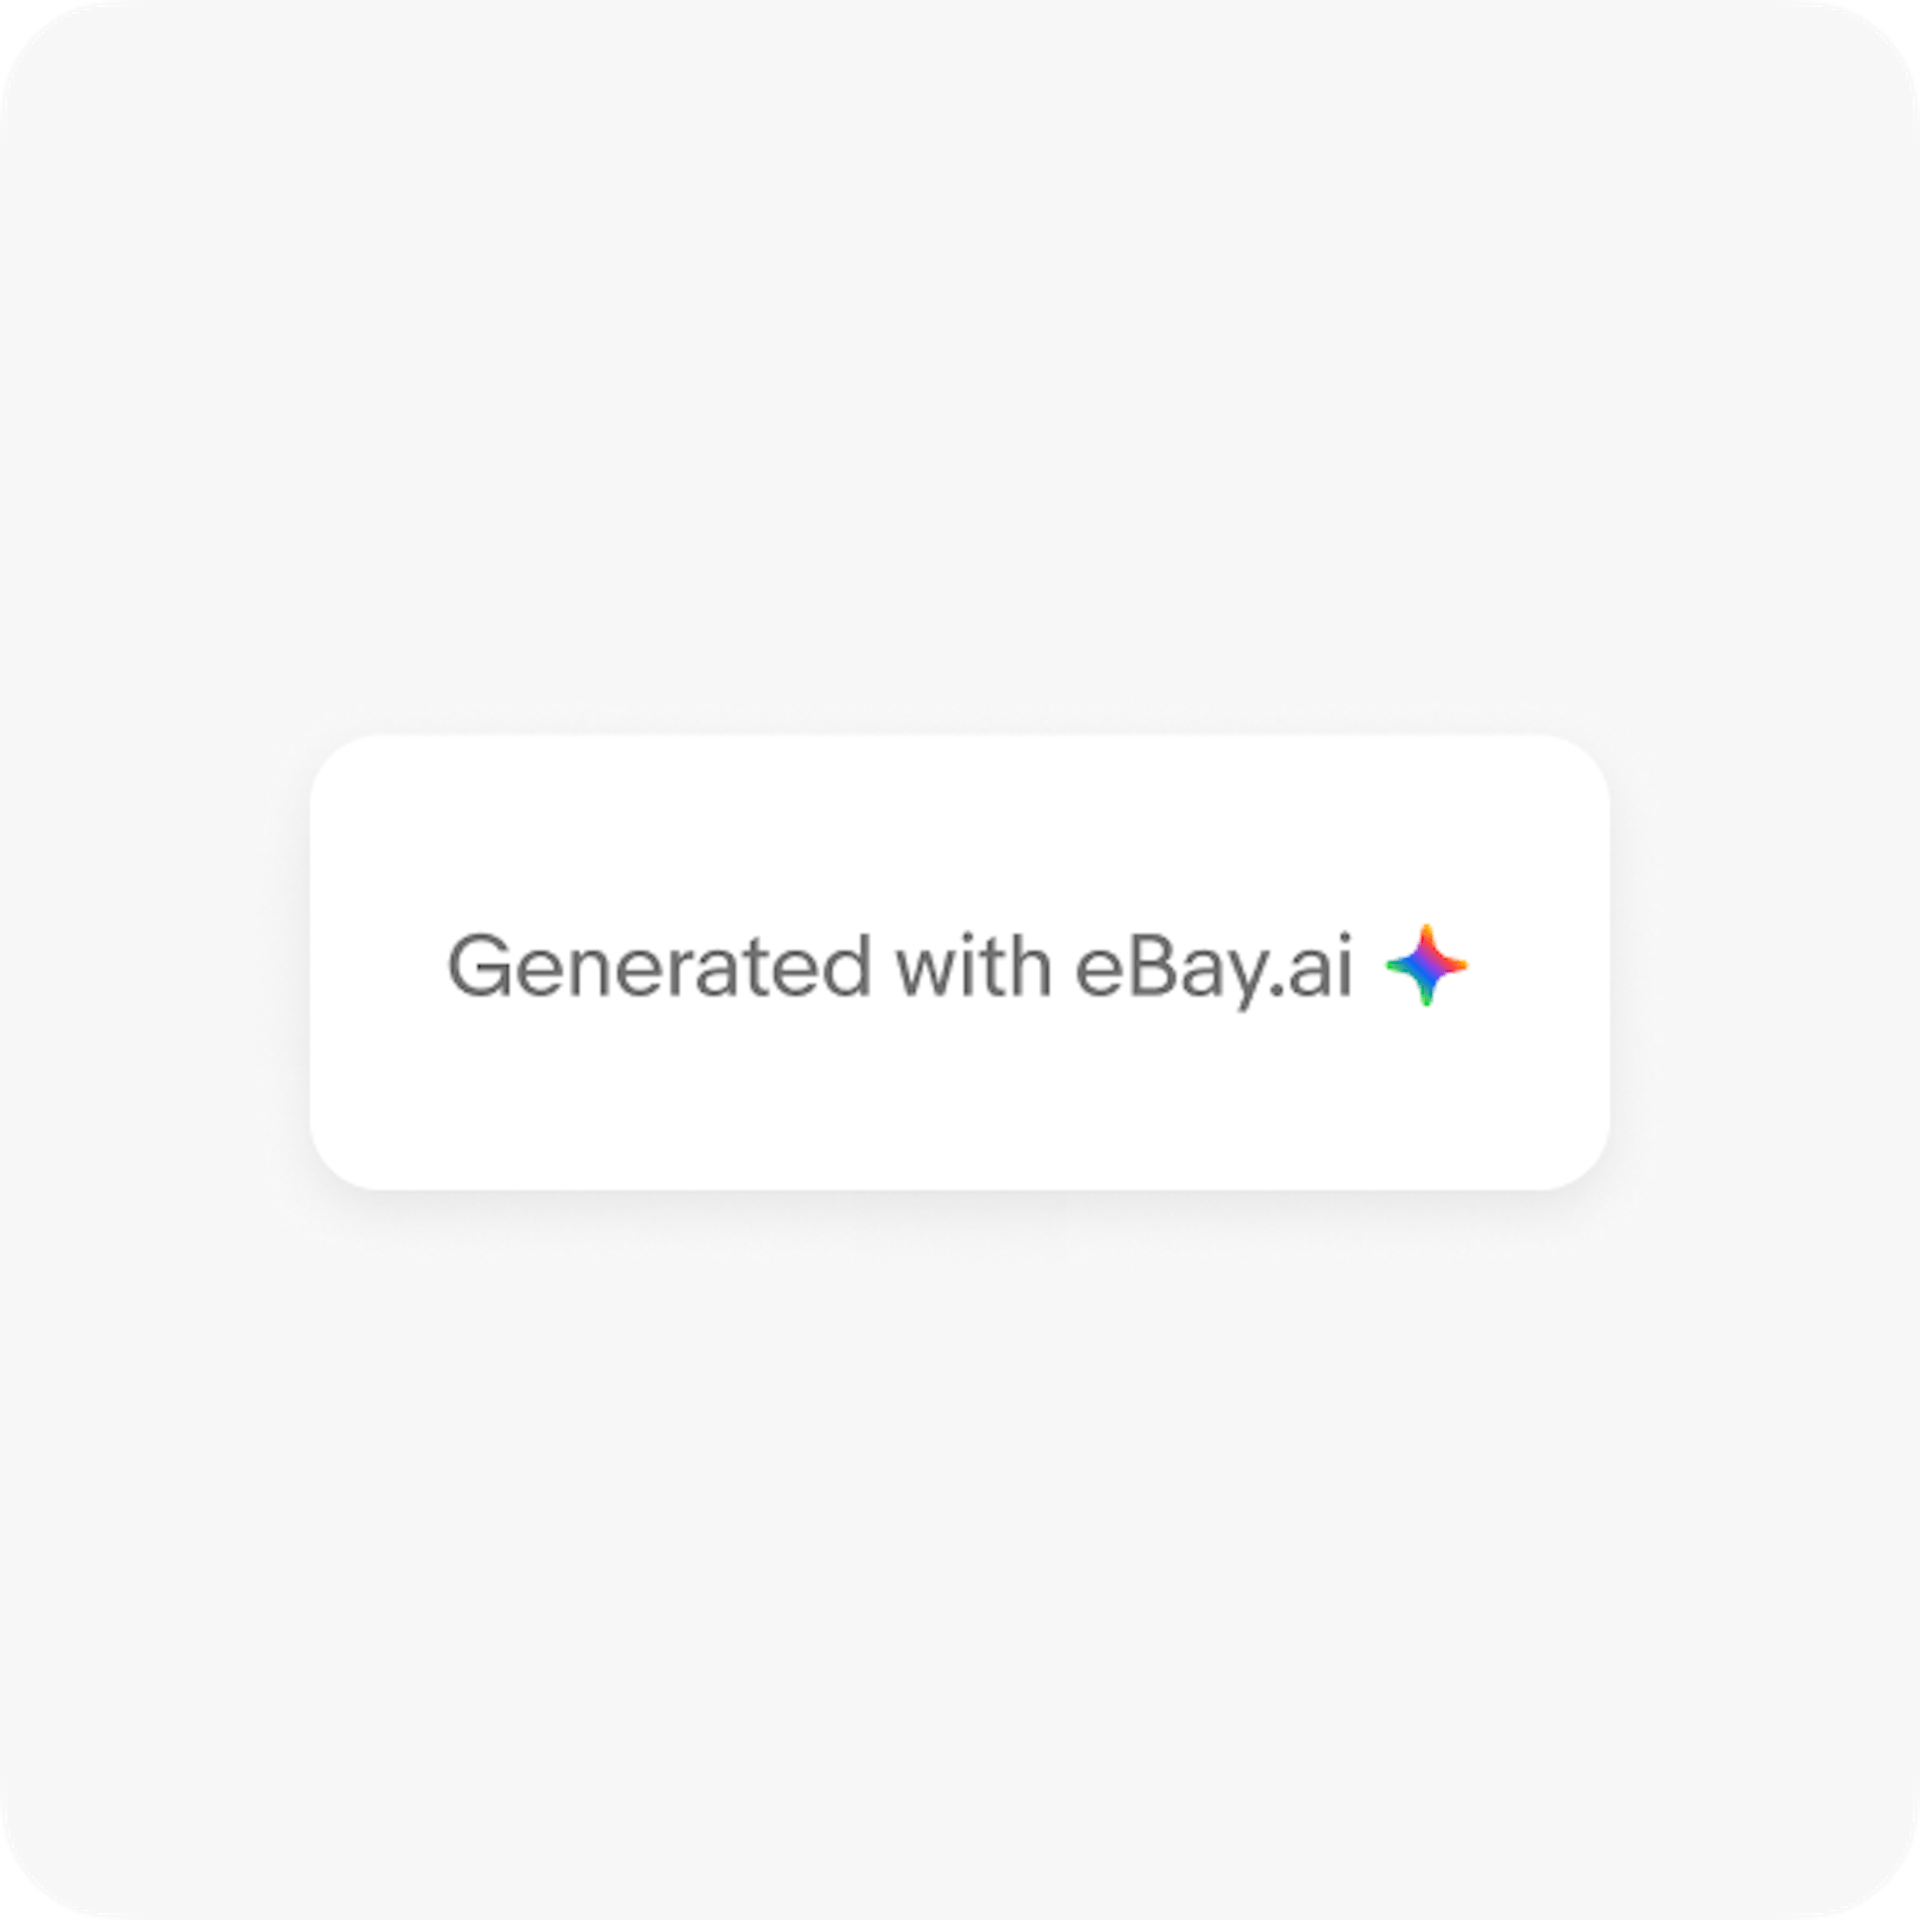 Example of a label that says “Generated with eBay.ai” followed by the full spectrum icon in color.